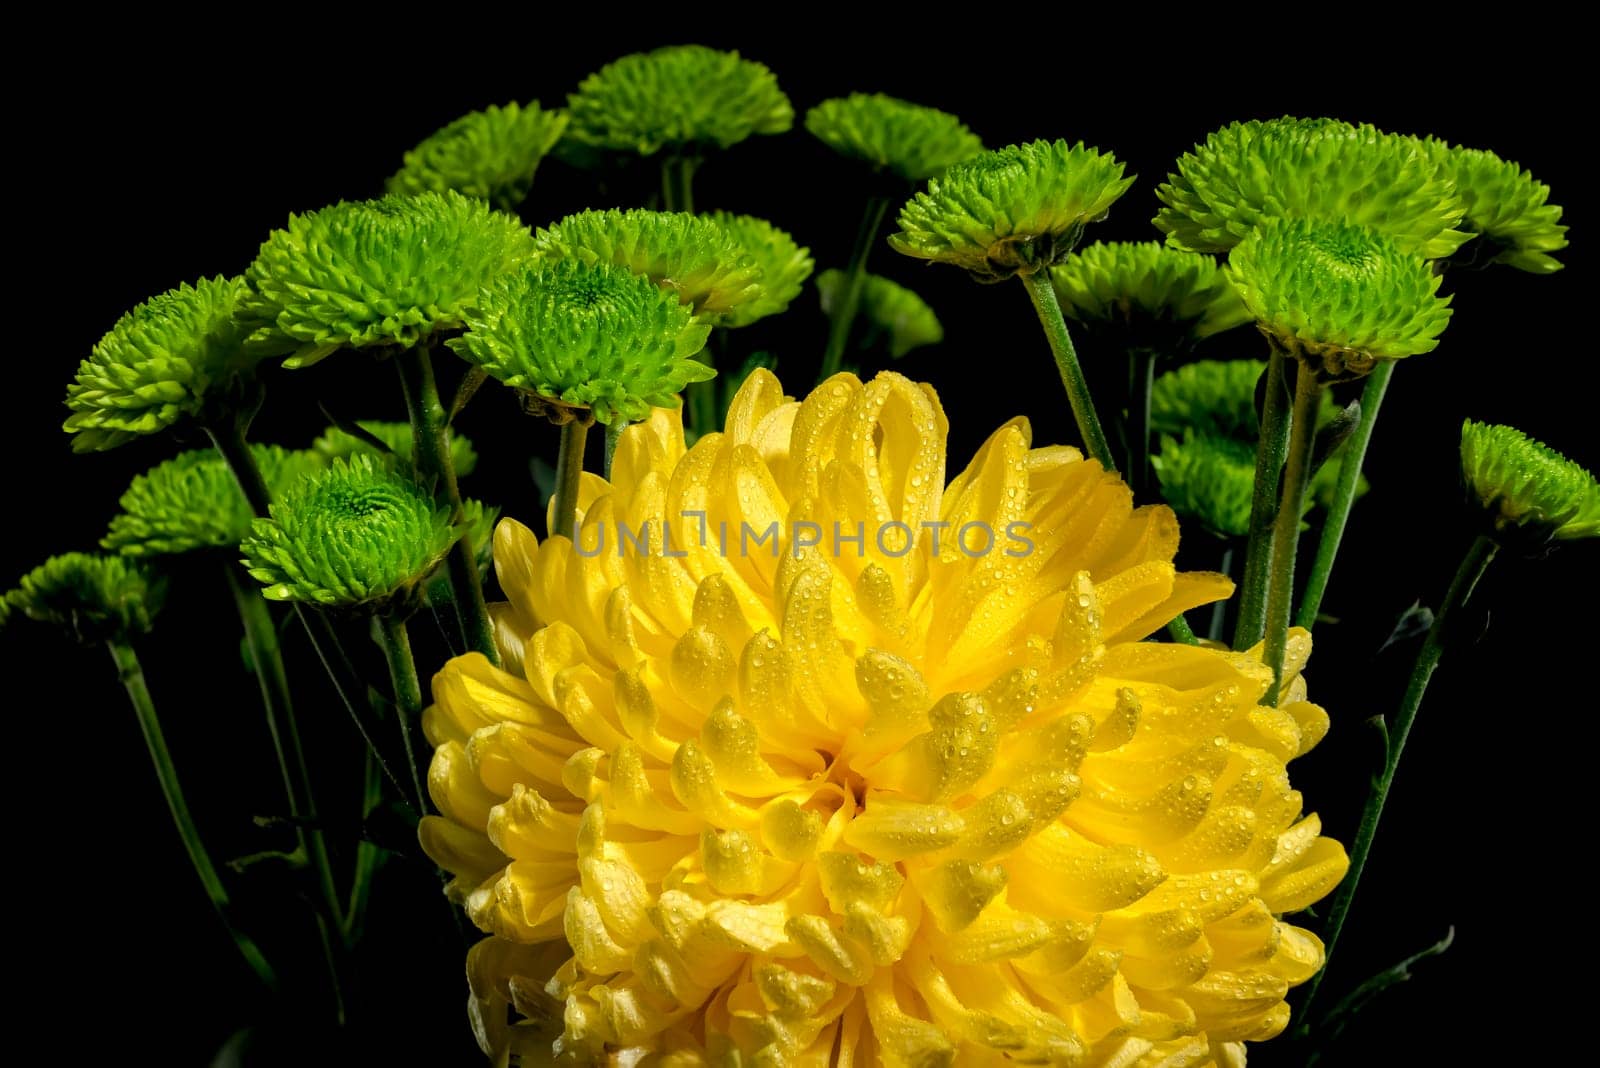 Yellow and green chrysanthemum flowers on a black background. Flower heads close-up